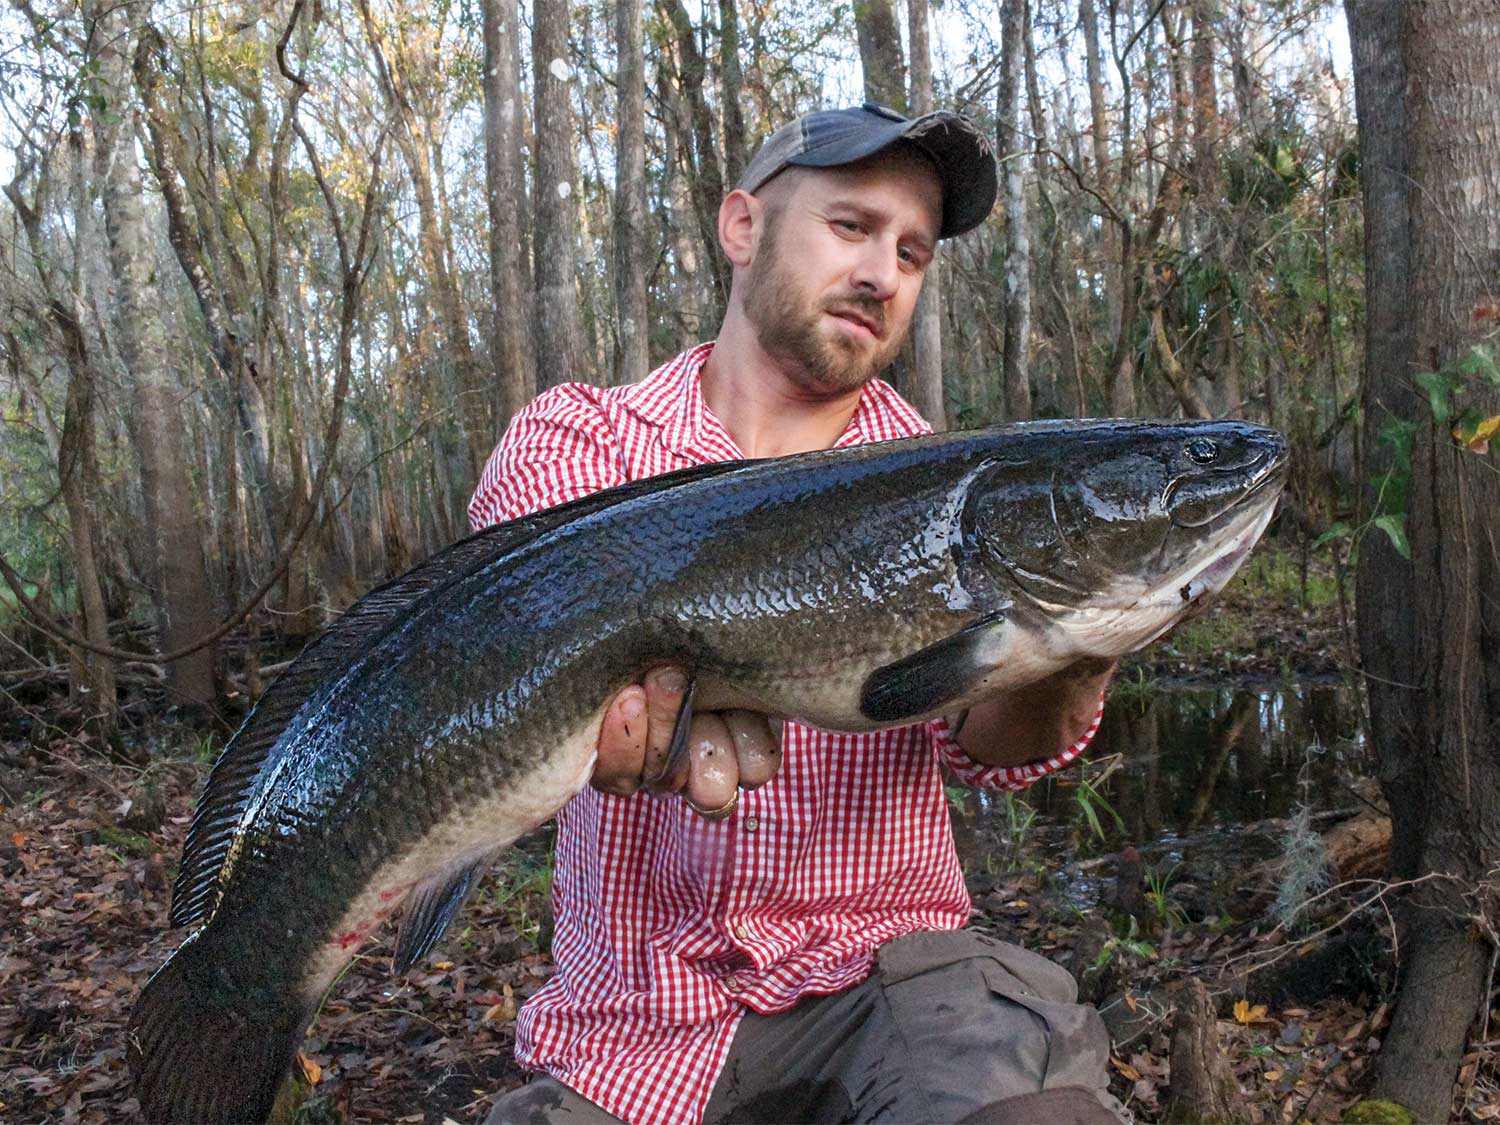 Angler holding up a large bowfin in the Florida Everglades.